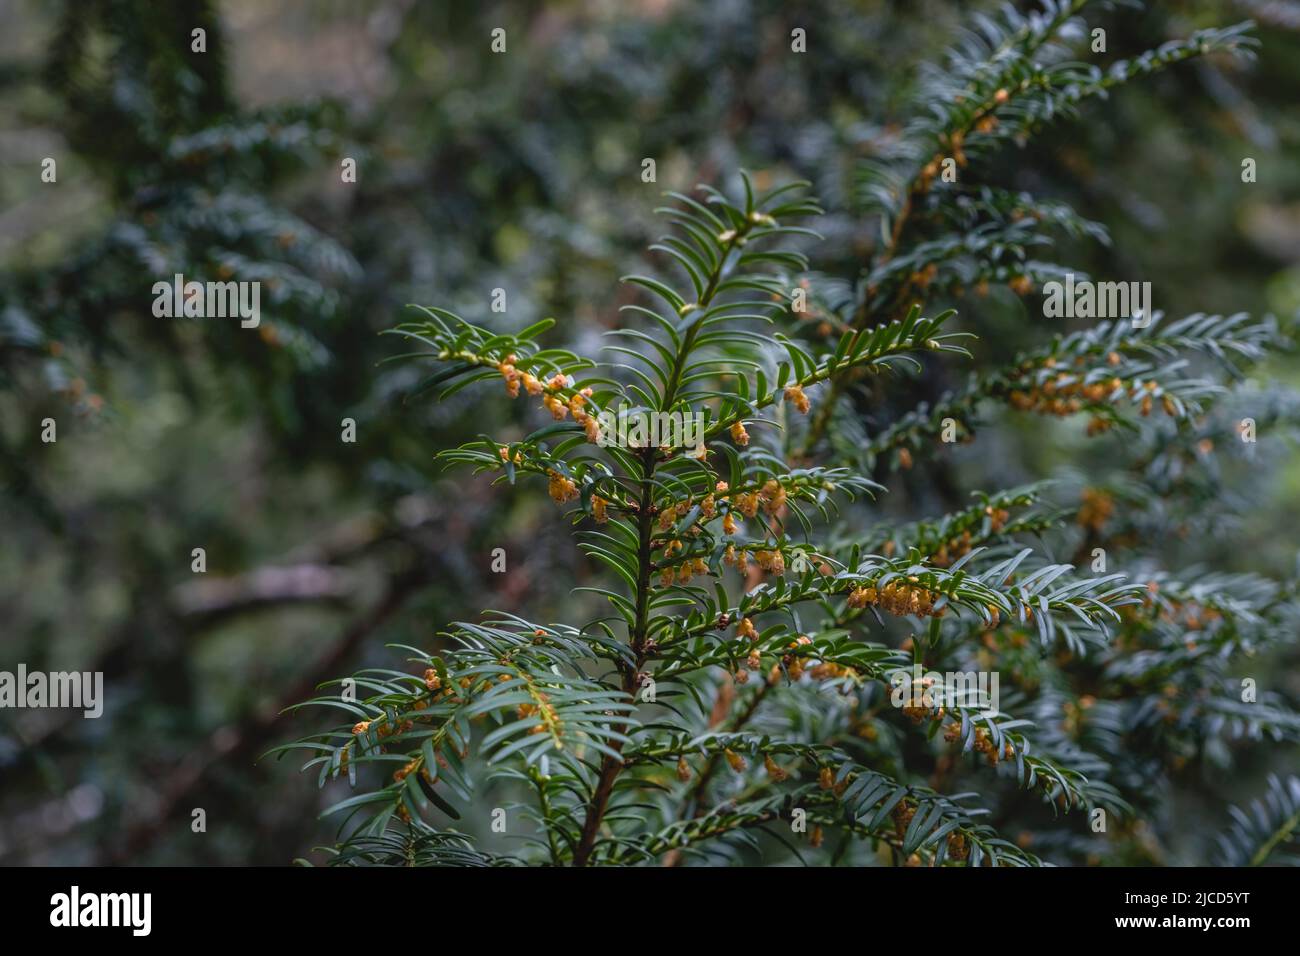 European yew (Taxus Baccata) dark green foliage and male flowers Stock Photo